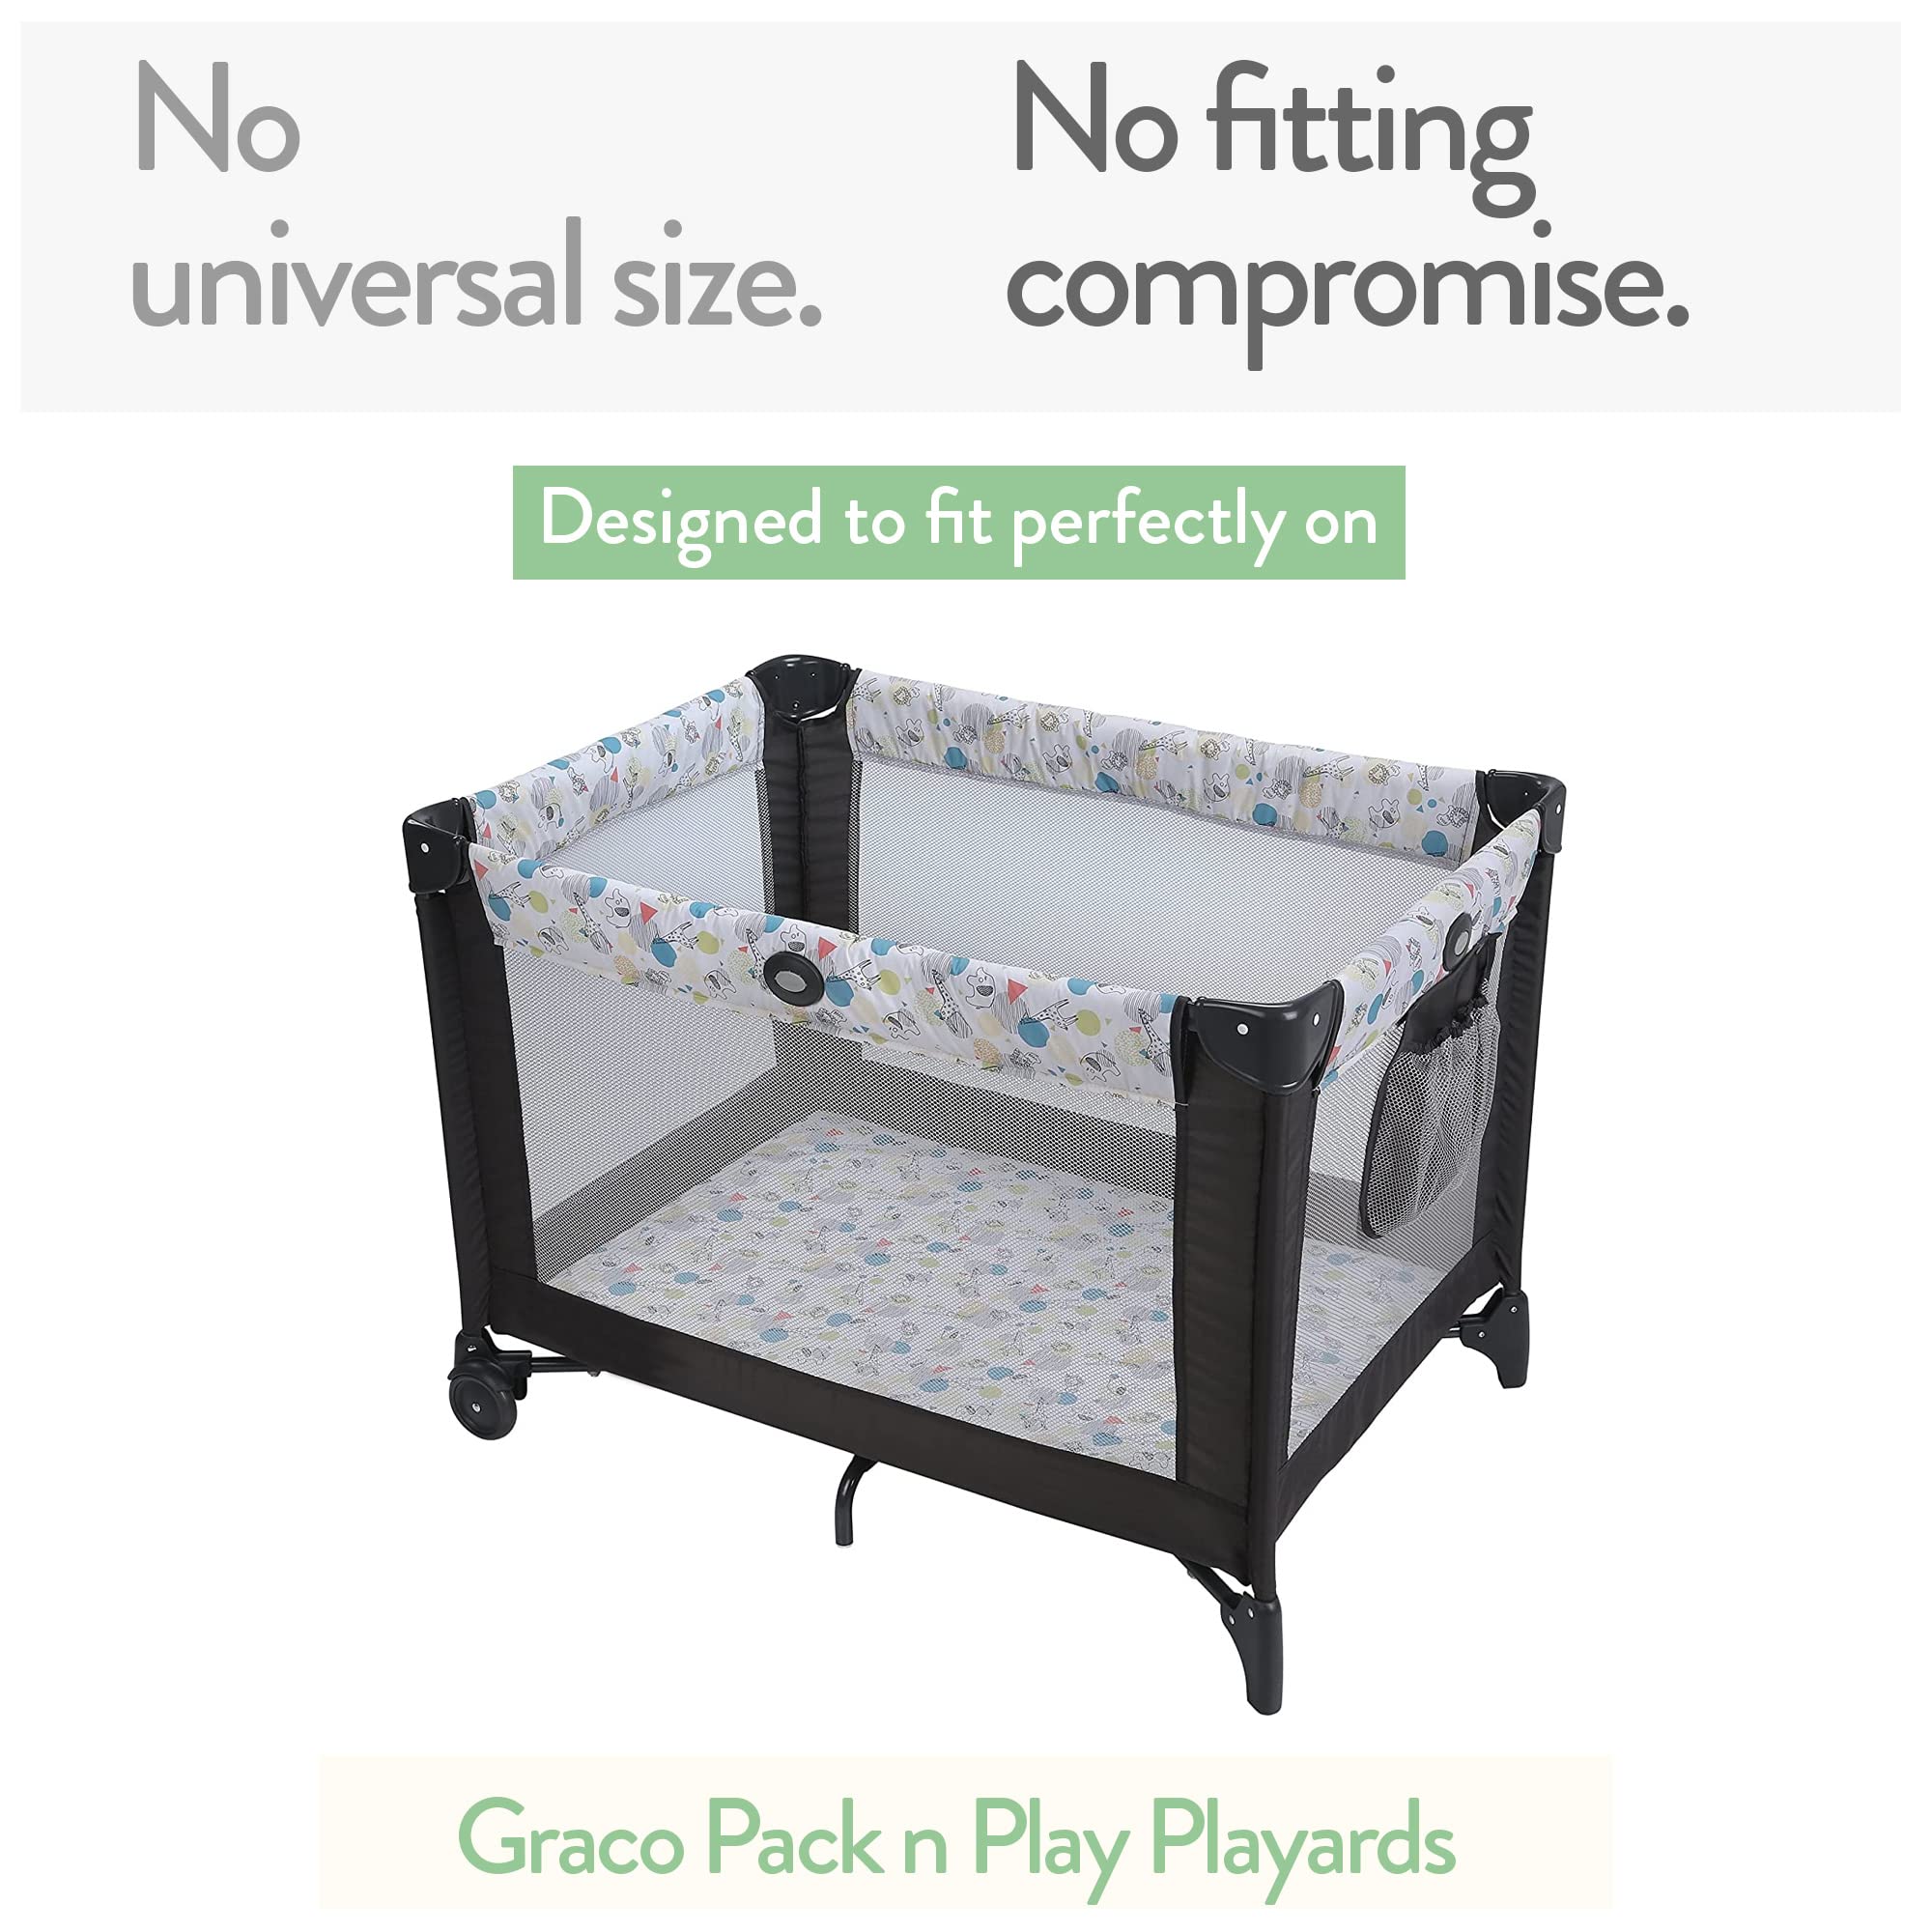 Pack and Play Sheets Fitted – Compatible with Graco Pack n Play Playard Crib and Other 27 x 39 Inch Playpen Mattress – Snuggly Soft 100% Jersey Cotton – Dusty Blue + Navy – 2 Pack